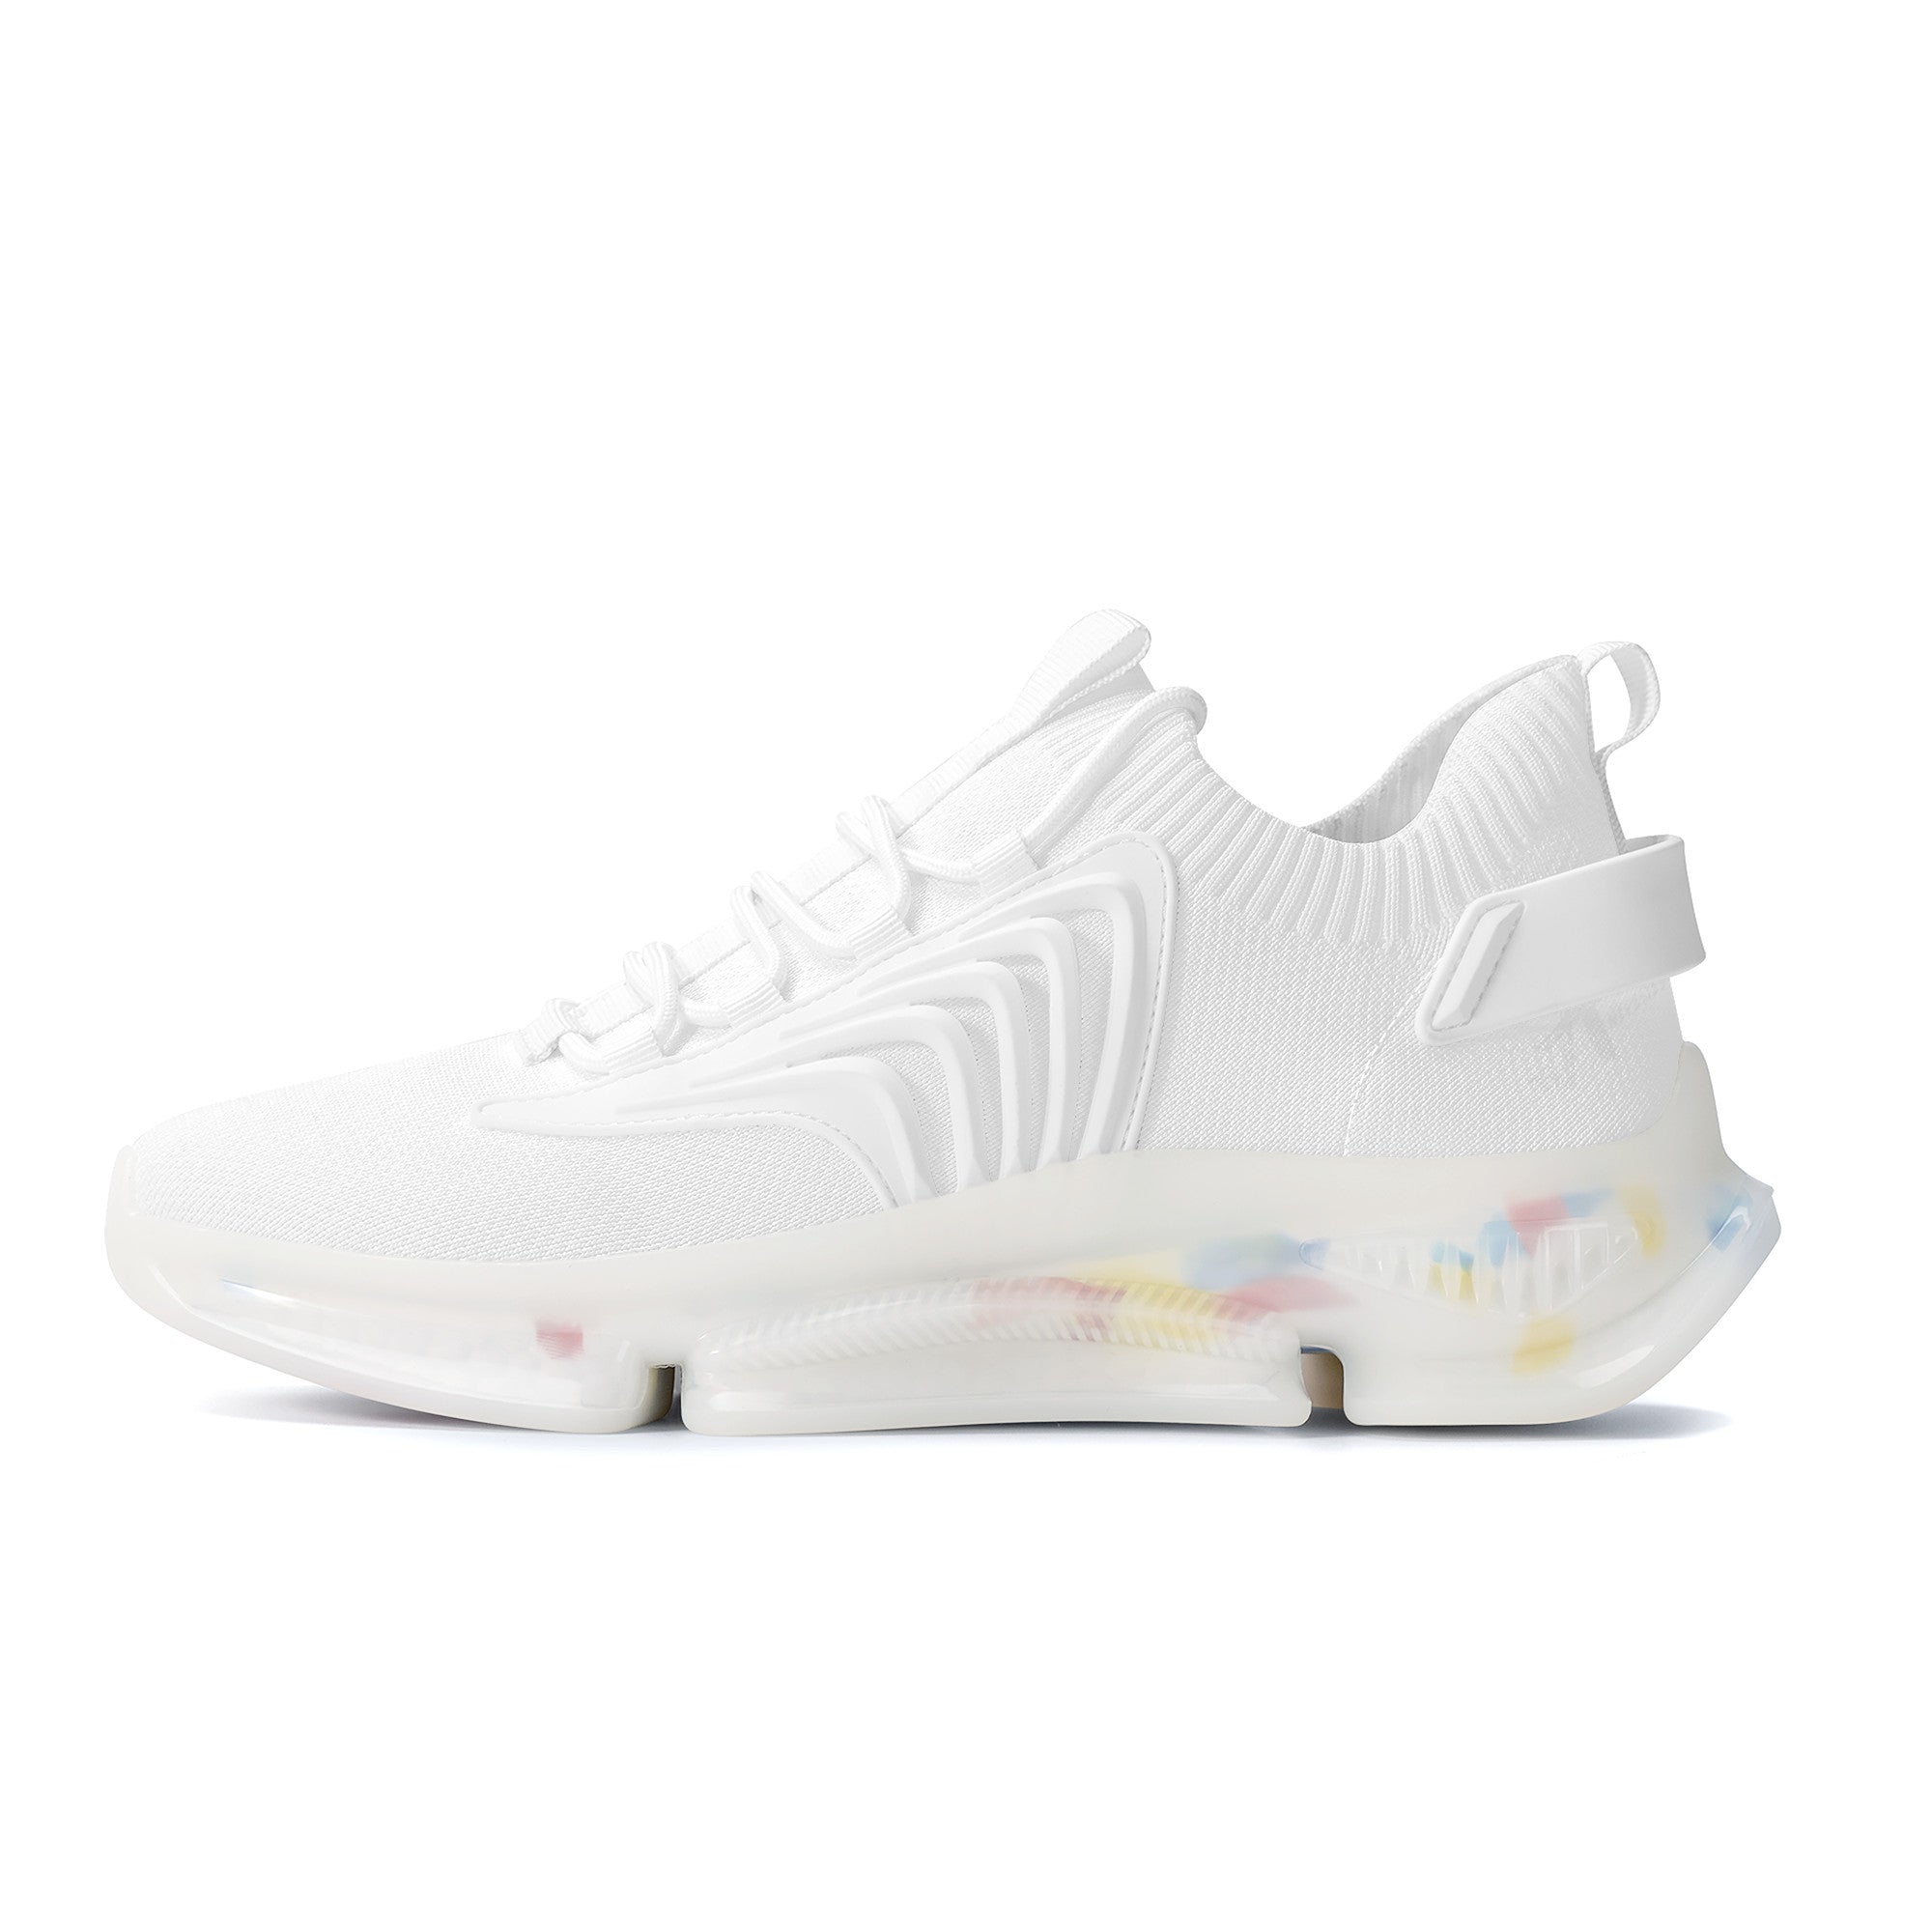 Manifest React Air Max Sneakers - White - running -shoes- fashion -clothing -store- summer sale- spring